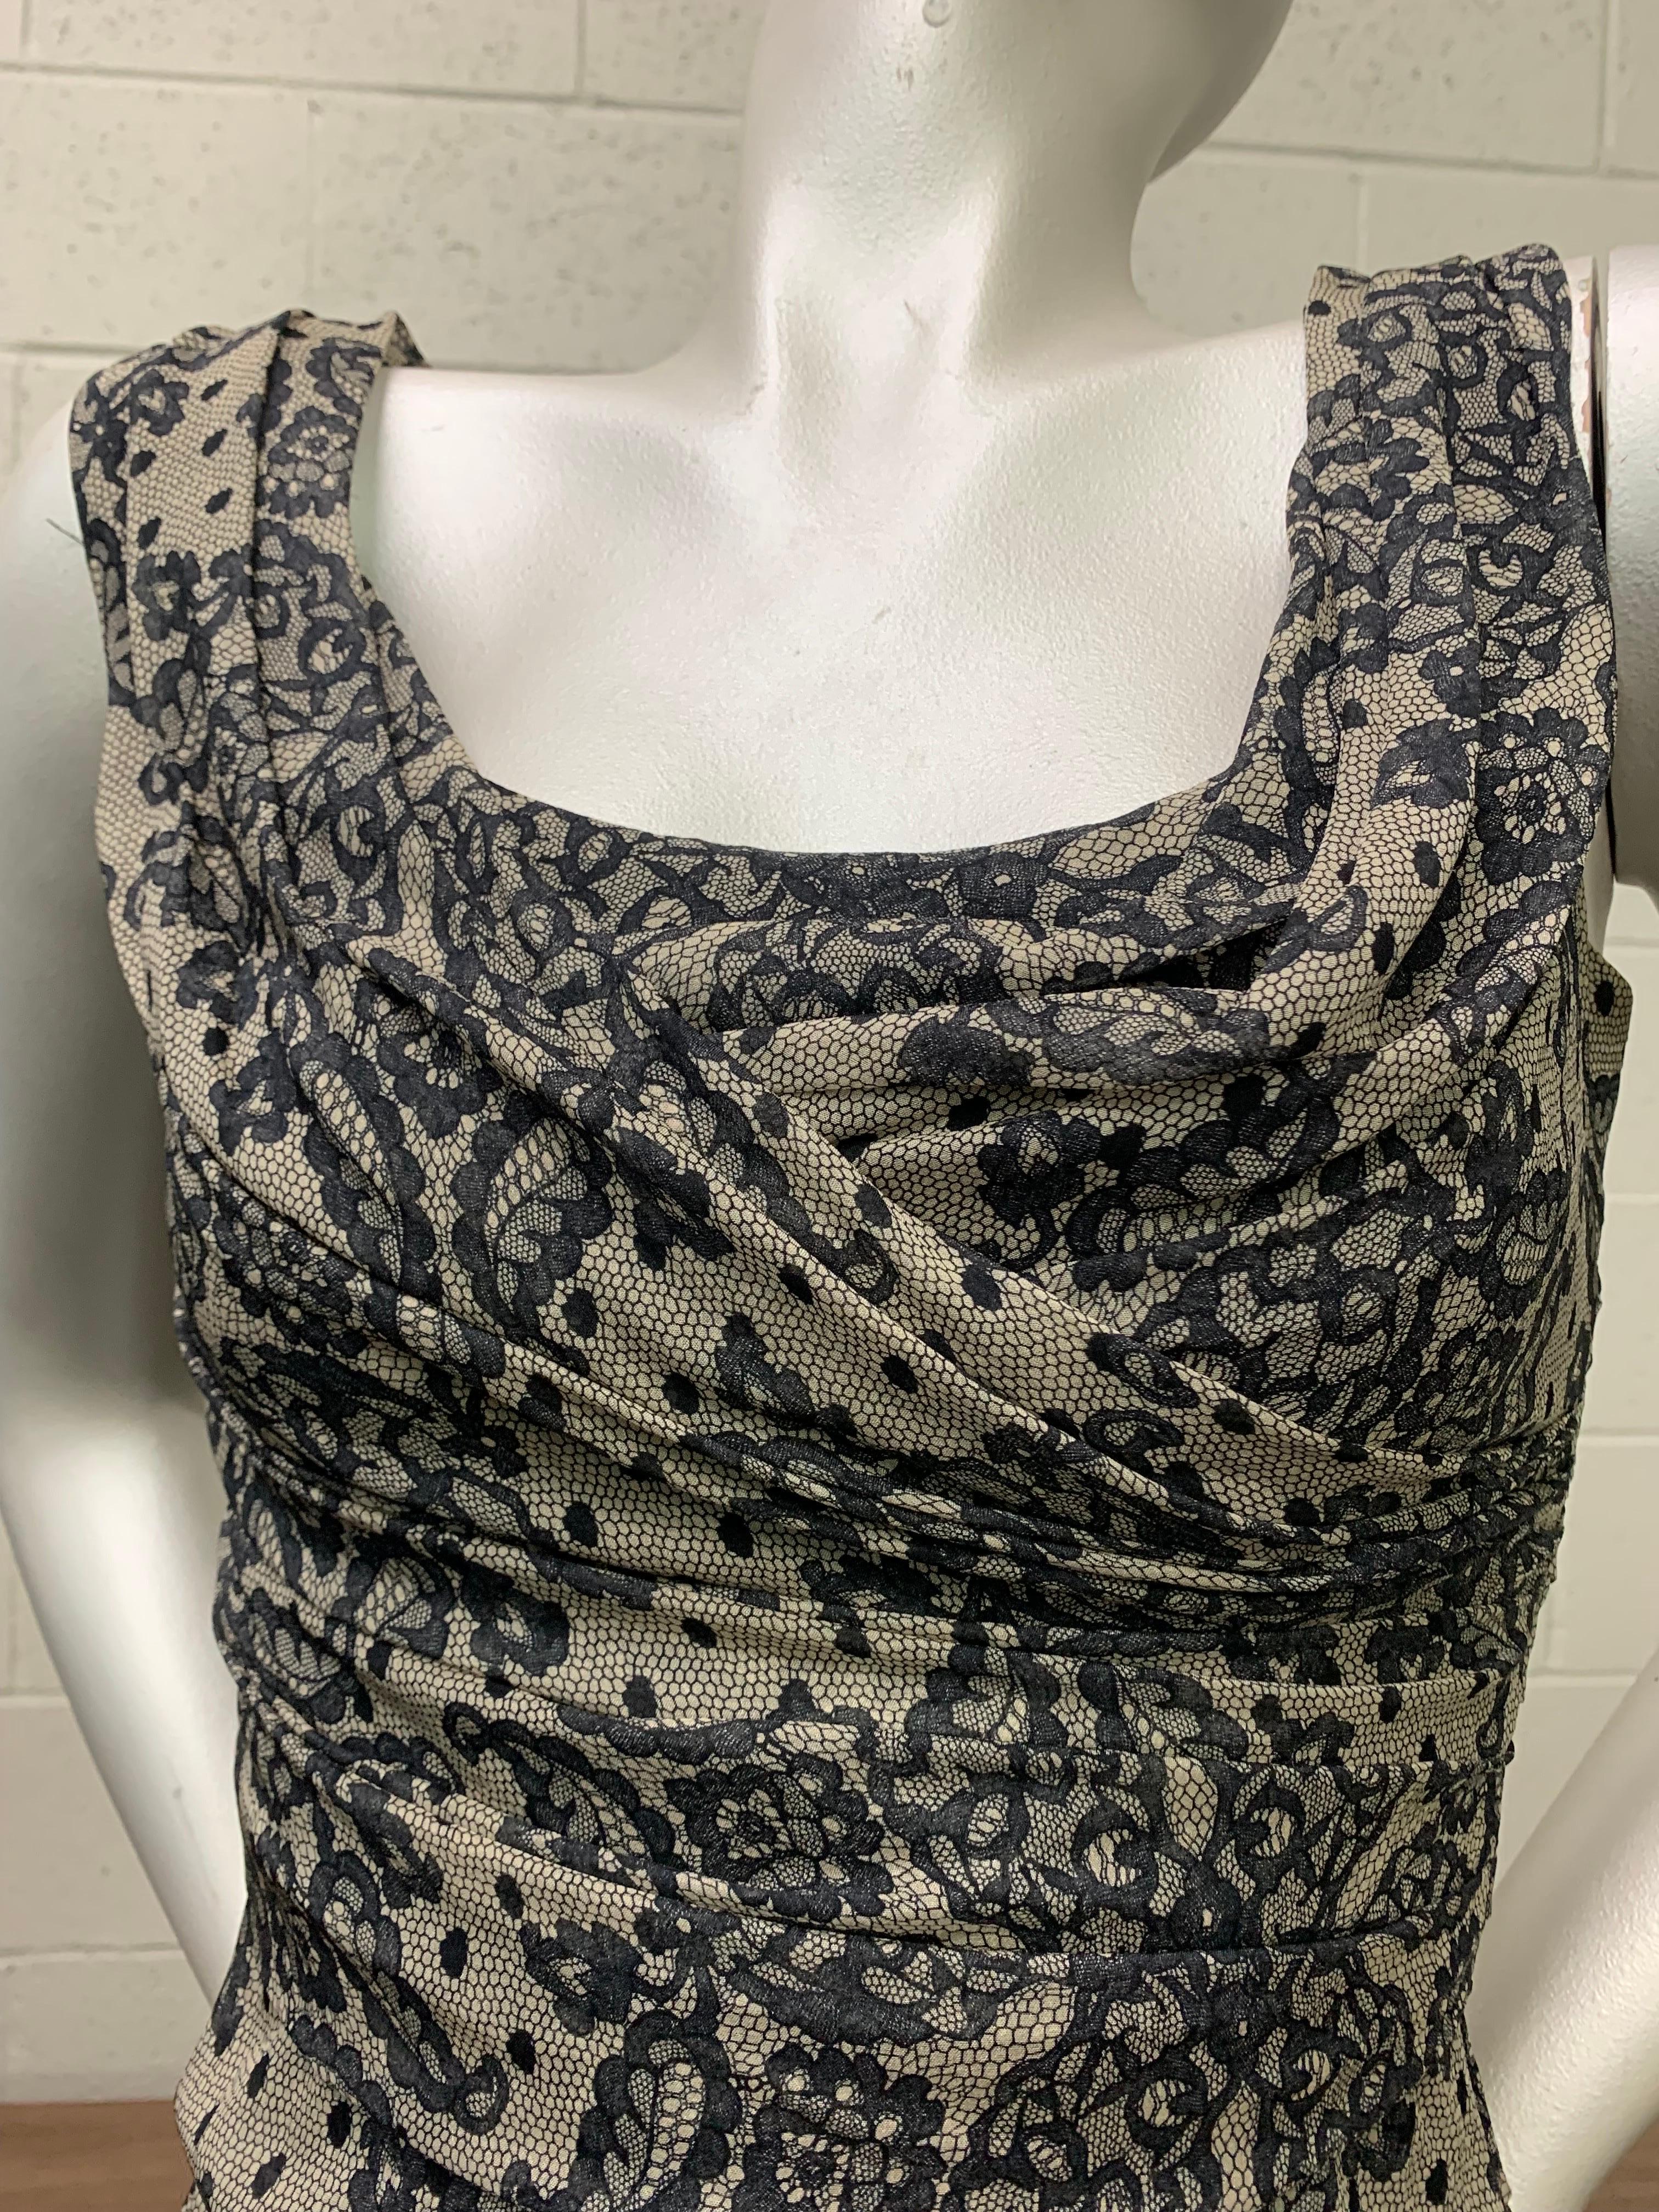 A fabulous, sexy, contemporary Dolce & Gabanna classic sheath dress in ruched stretch silk, printed with a black and ecru lace pattern. Back zipper. Squared neckline and wide straps. Pristine condition. Size 42. 